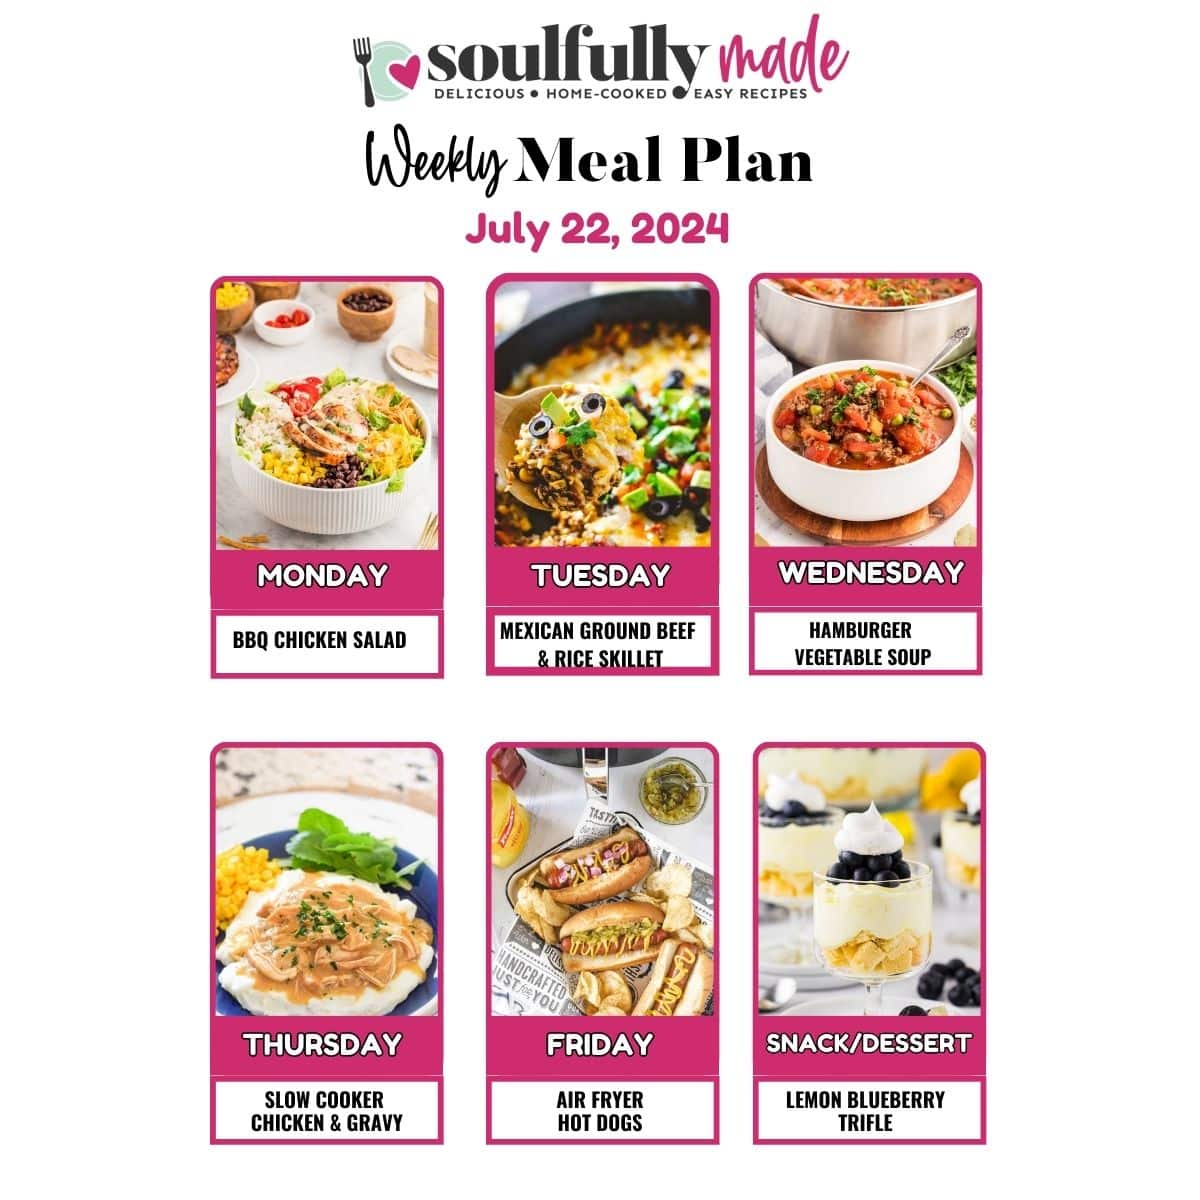 Weekly Meal Plan July 22, 2024